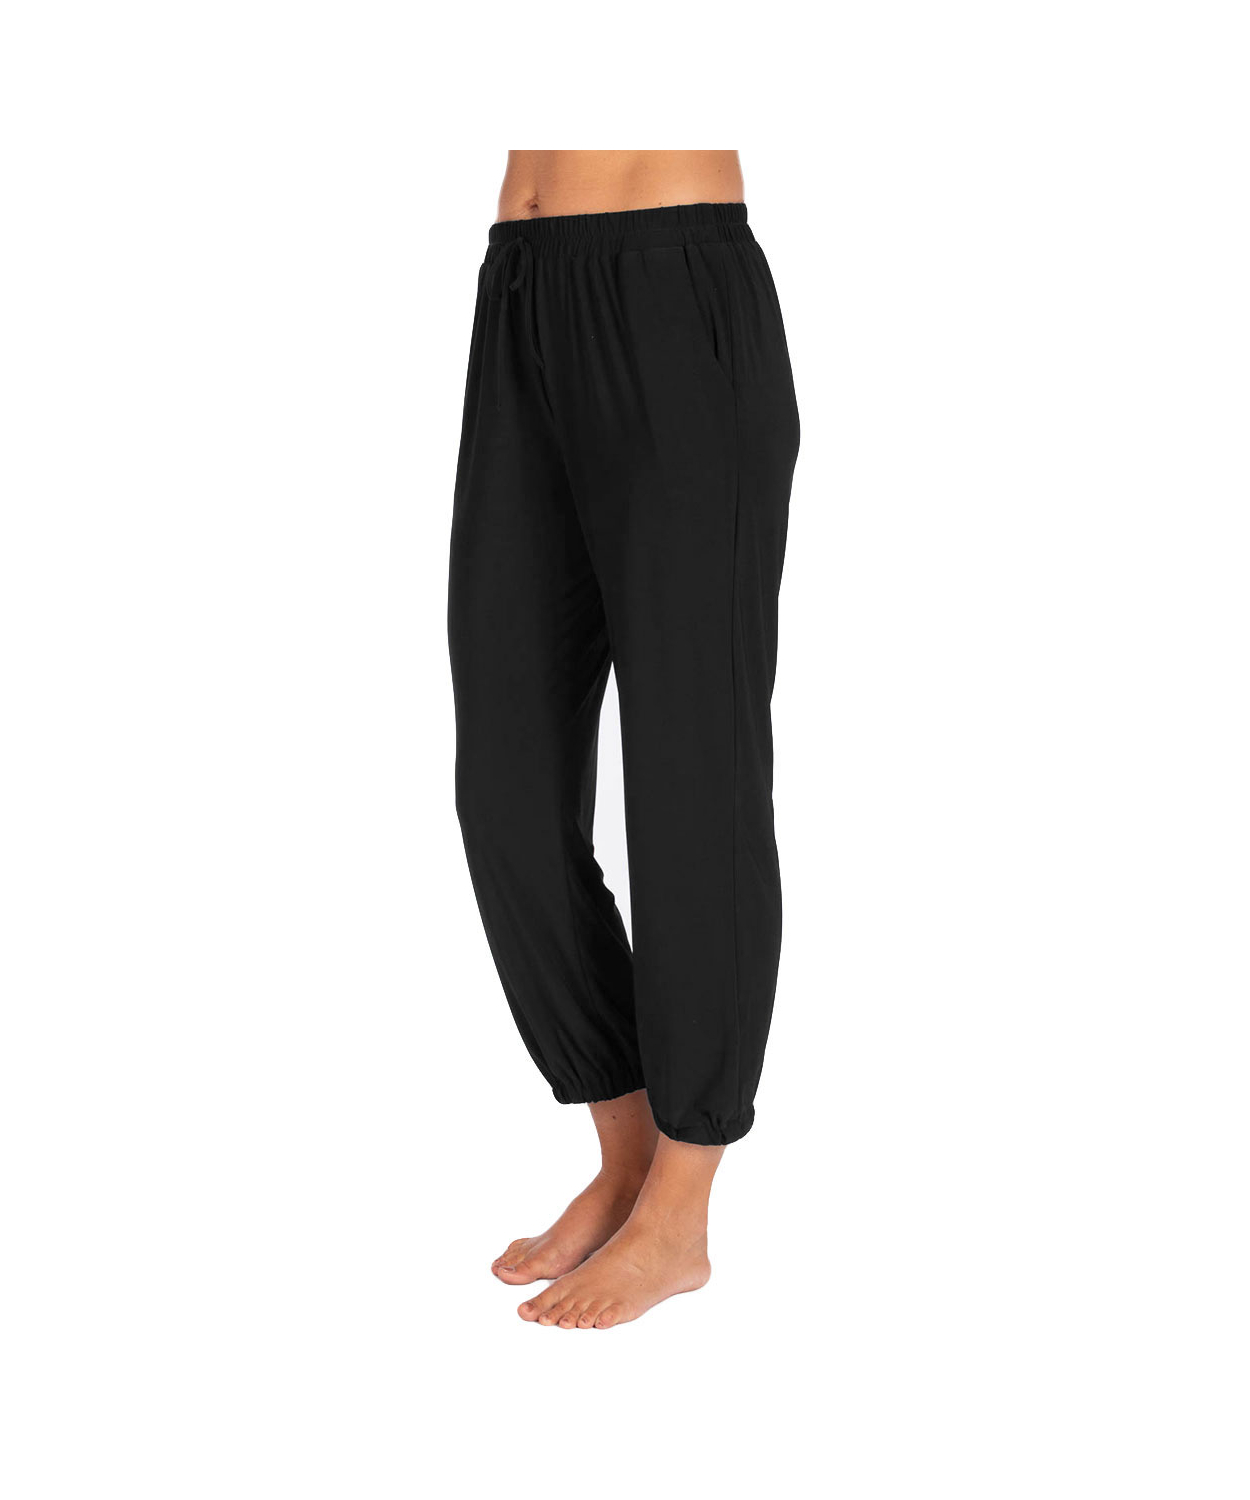 Casual Women Super Soft Joggers Lounge Pants with Side Pockets